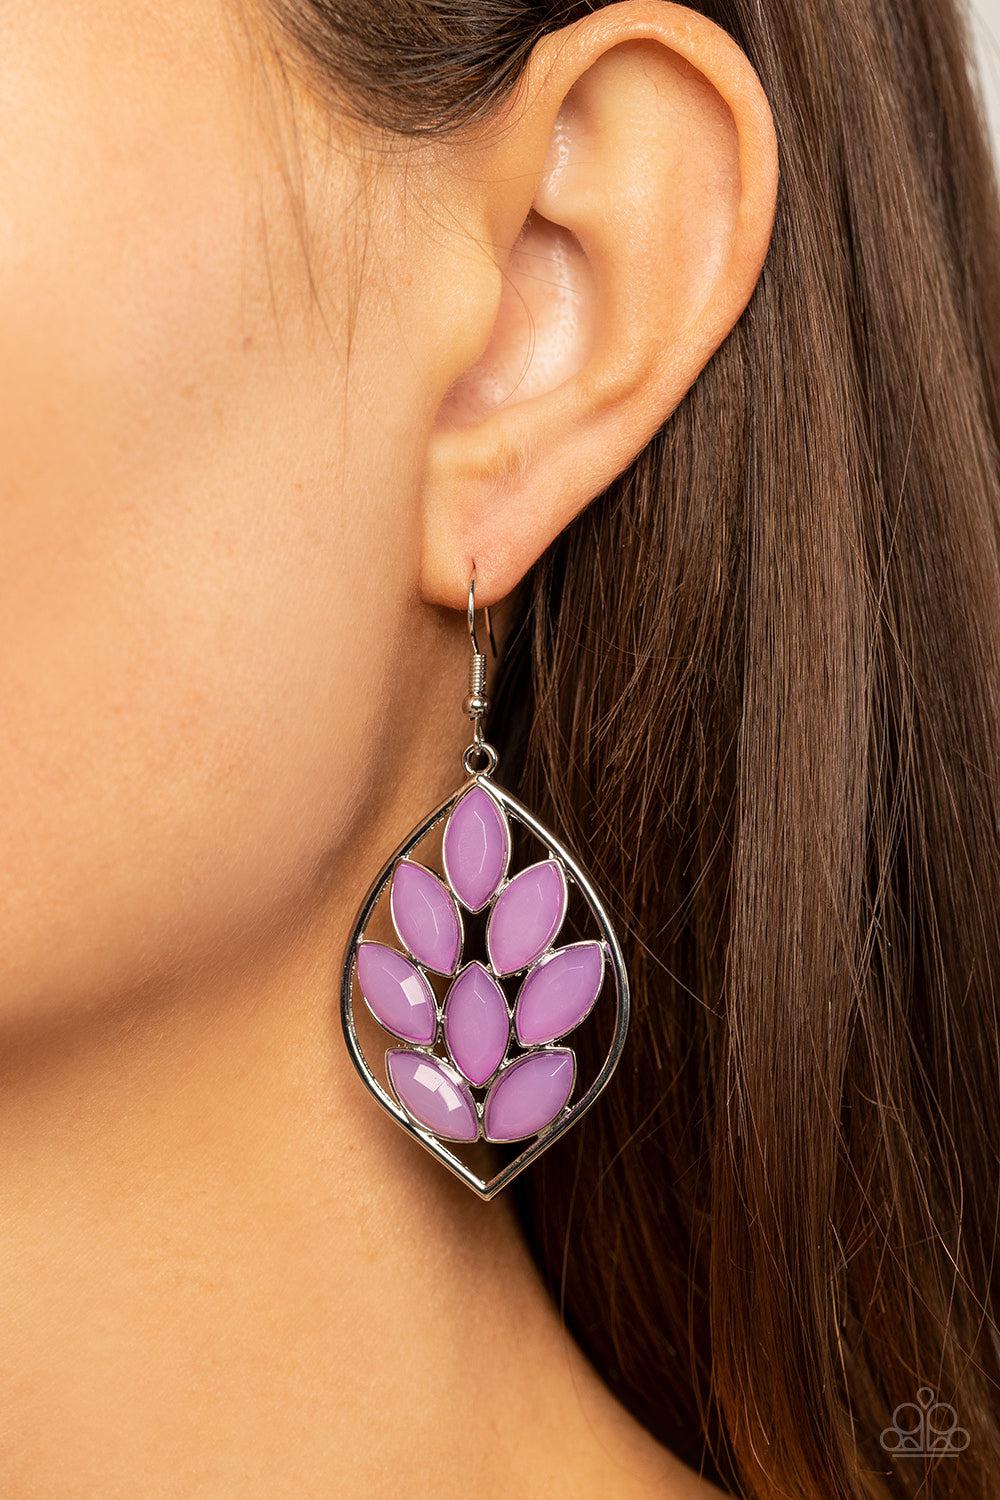 Glacial Glades Purple Earrings - Paparazzi Accessories-on model - CarasShop.com - $5 Jewelry by Cara Jewels